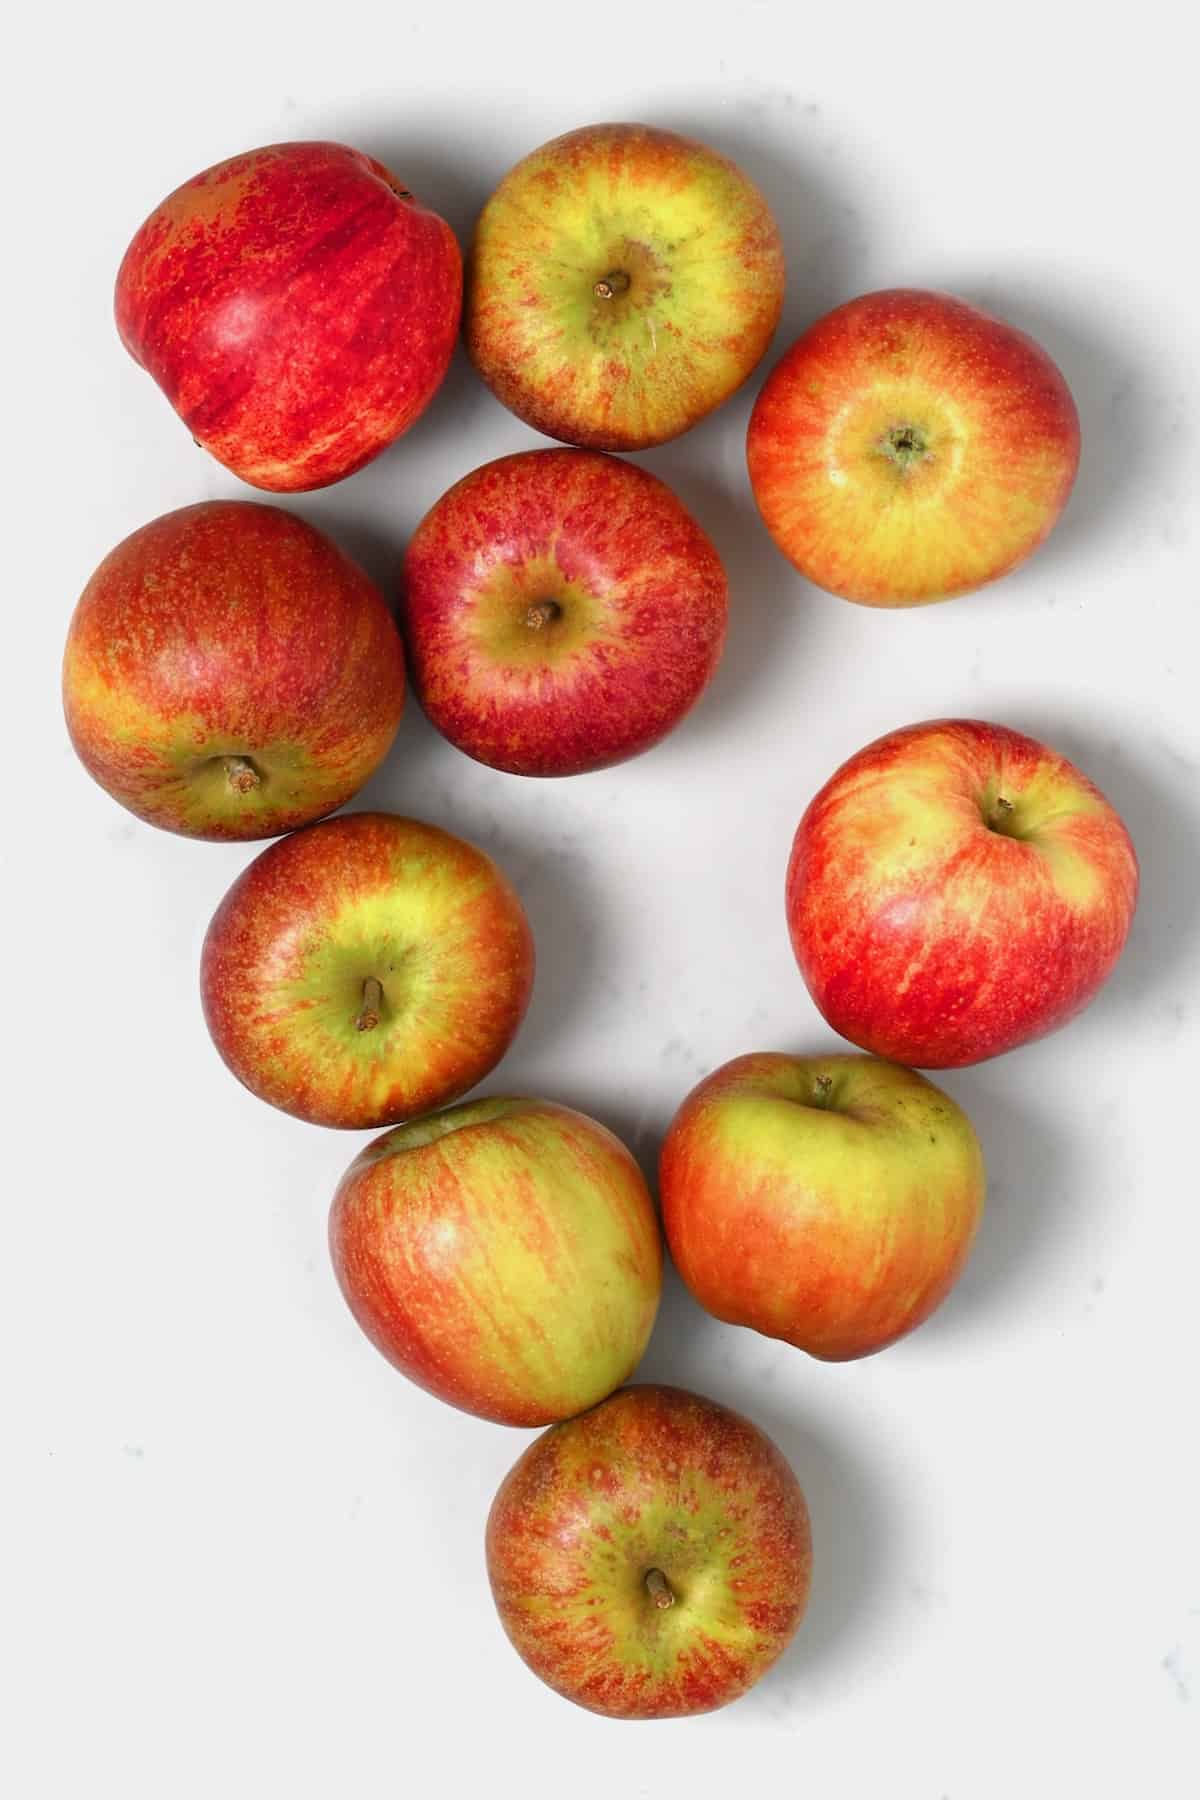 Ten red apples on a flat surface